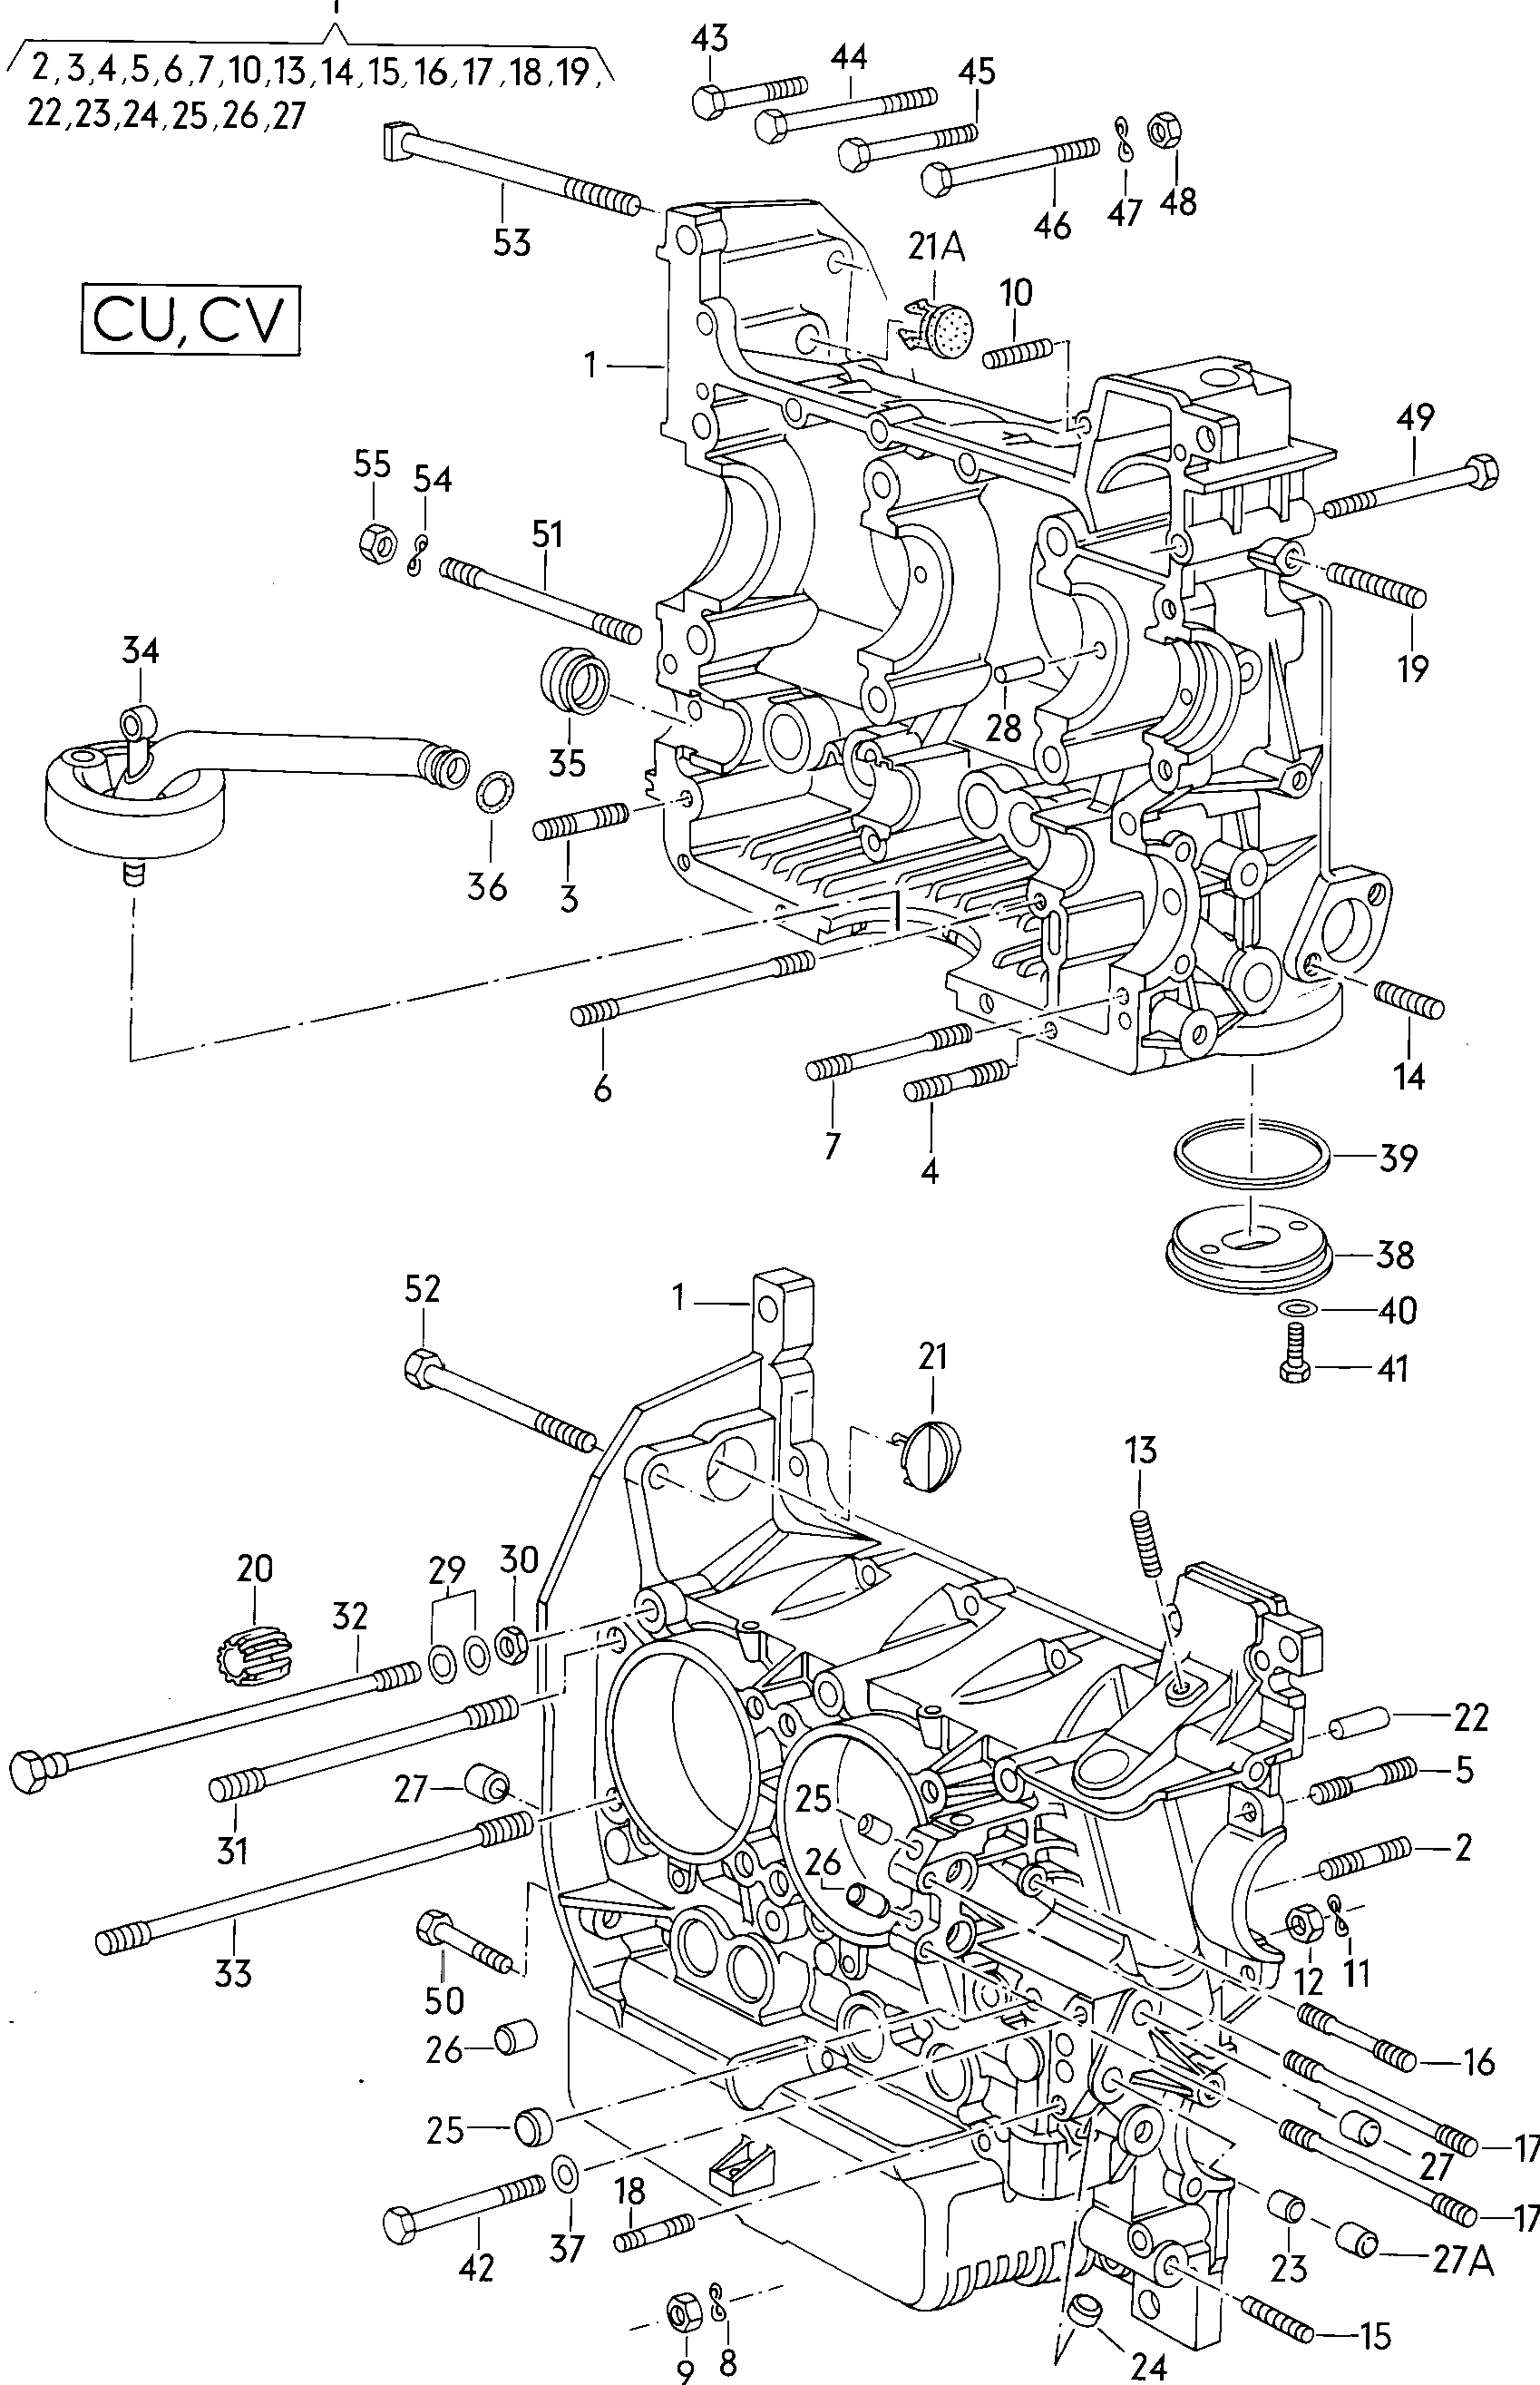 mounting parts for engine and<br>transmission  - Typ 2/syncro - t2